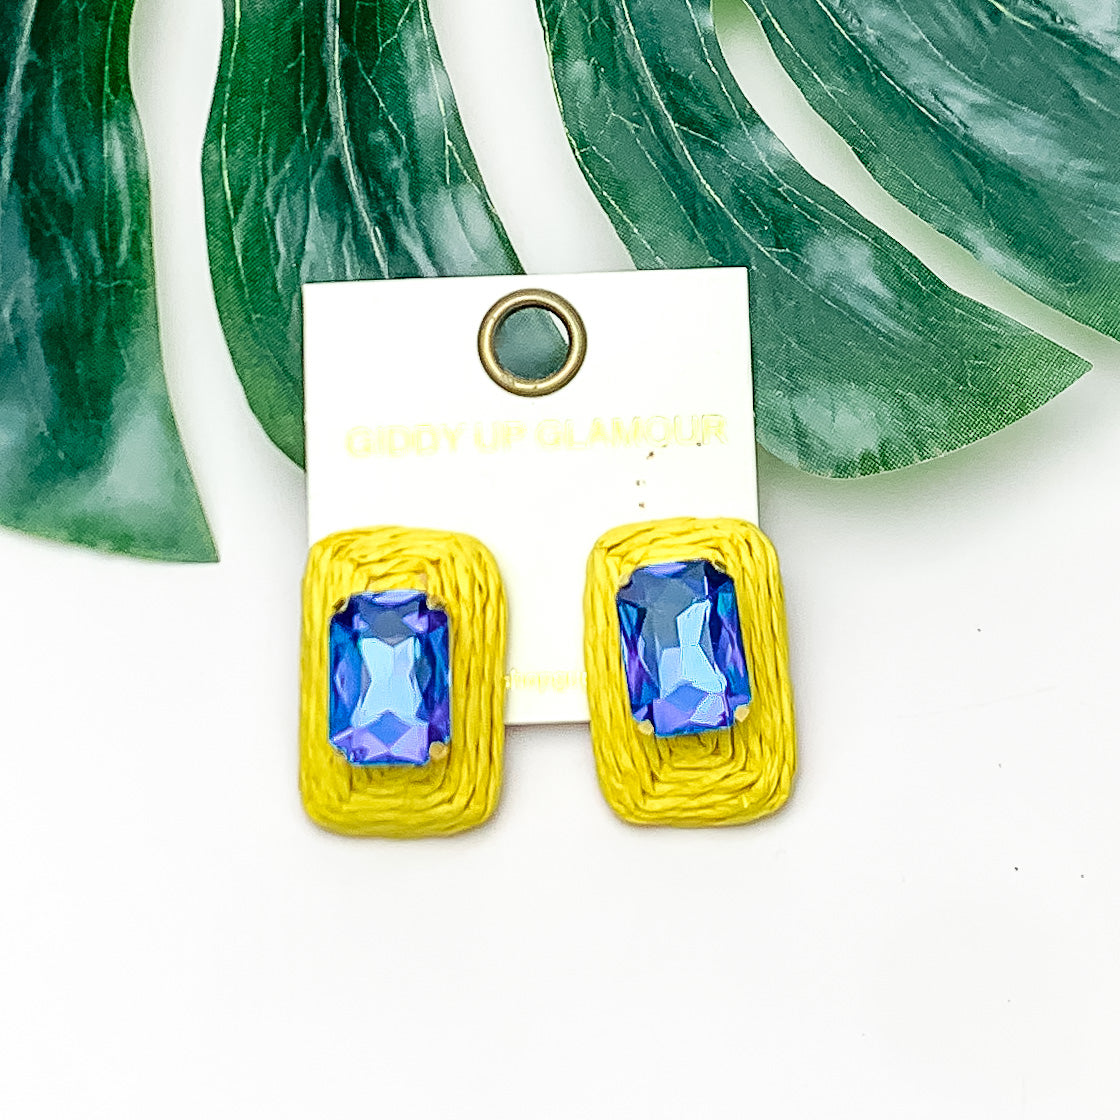 Truly Tropical Raffia Rectangle Earrings in Yellow With Blue Crystal. Pictured on a white background with the earrings laying on a large leaf.